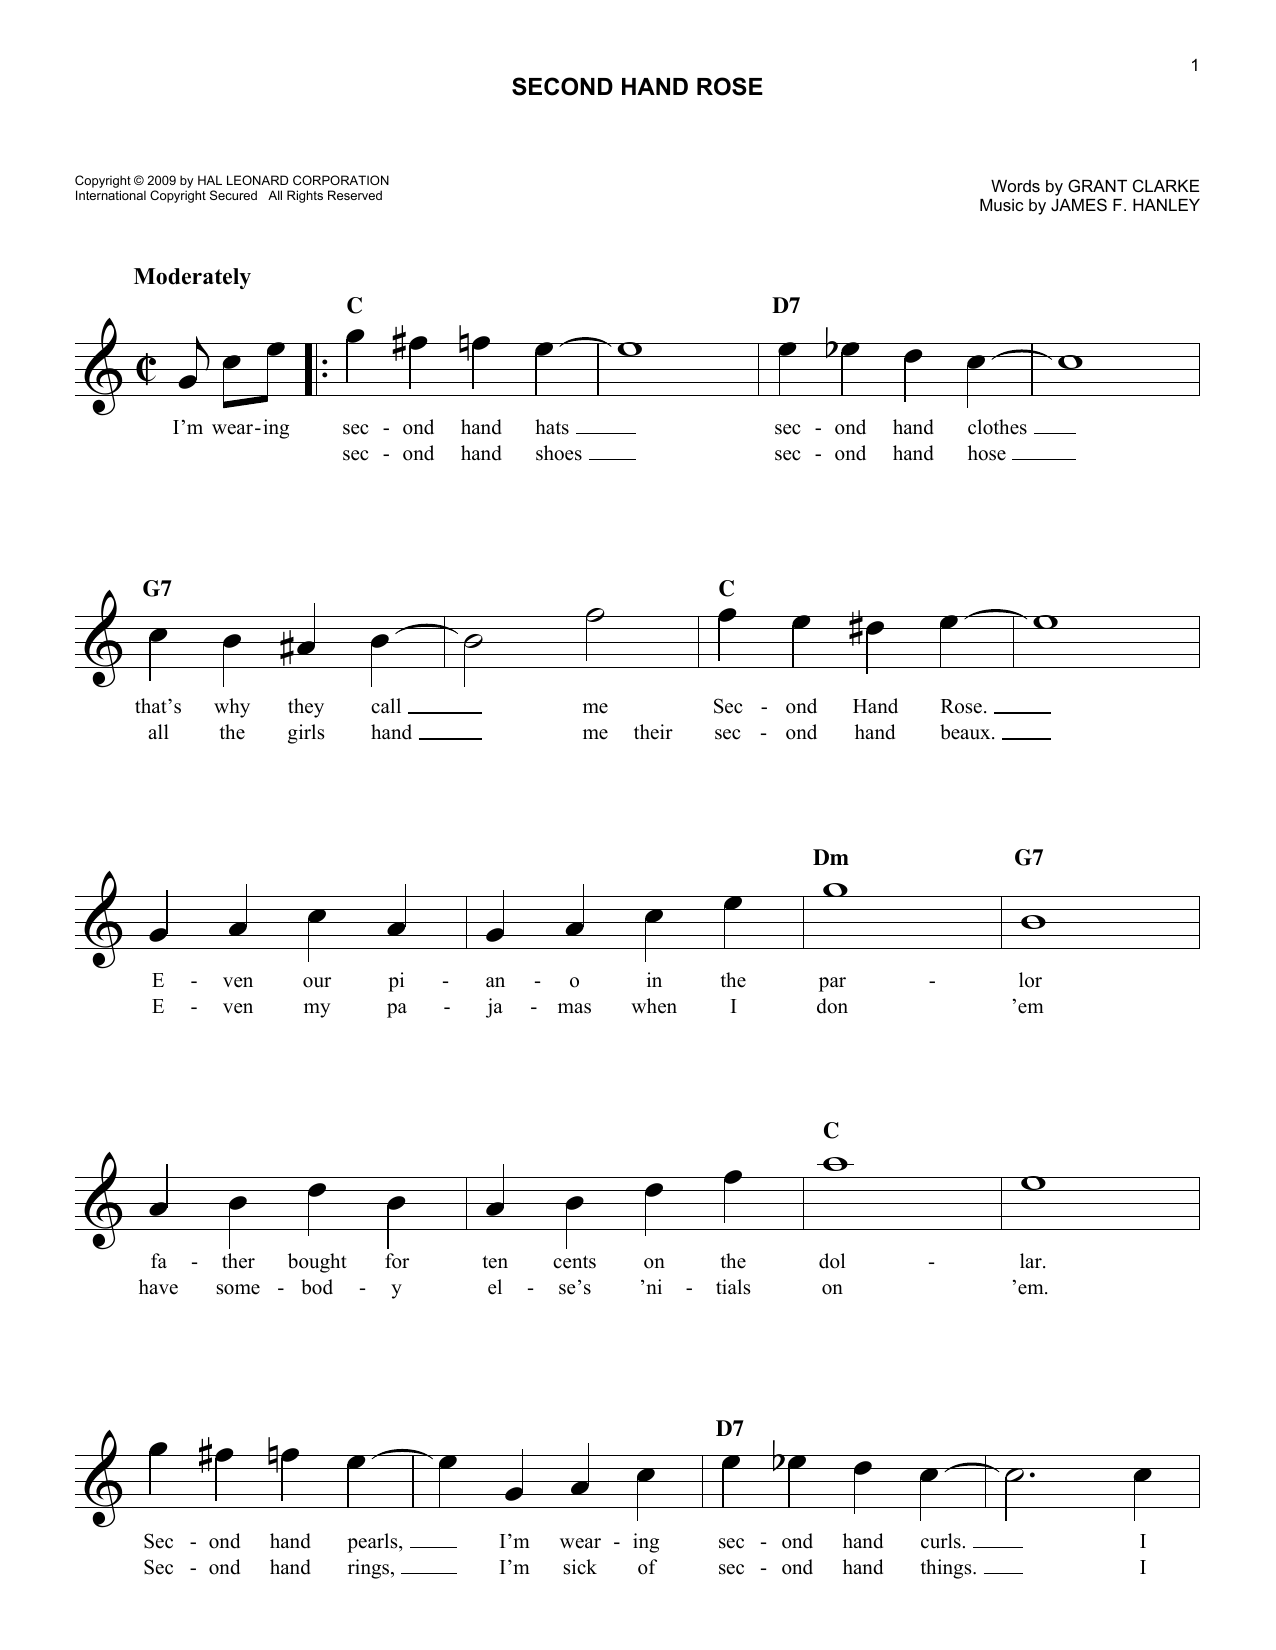 Grant Clarke Second Hand Rose sheet music notes and chords. Download Printable PDF.